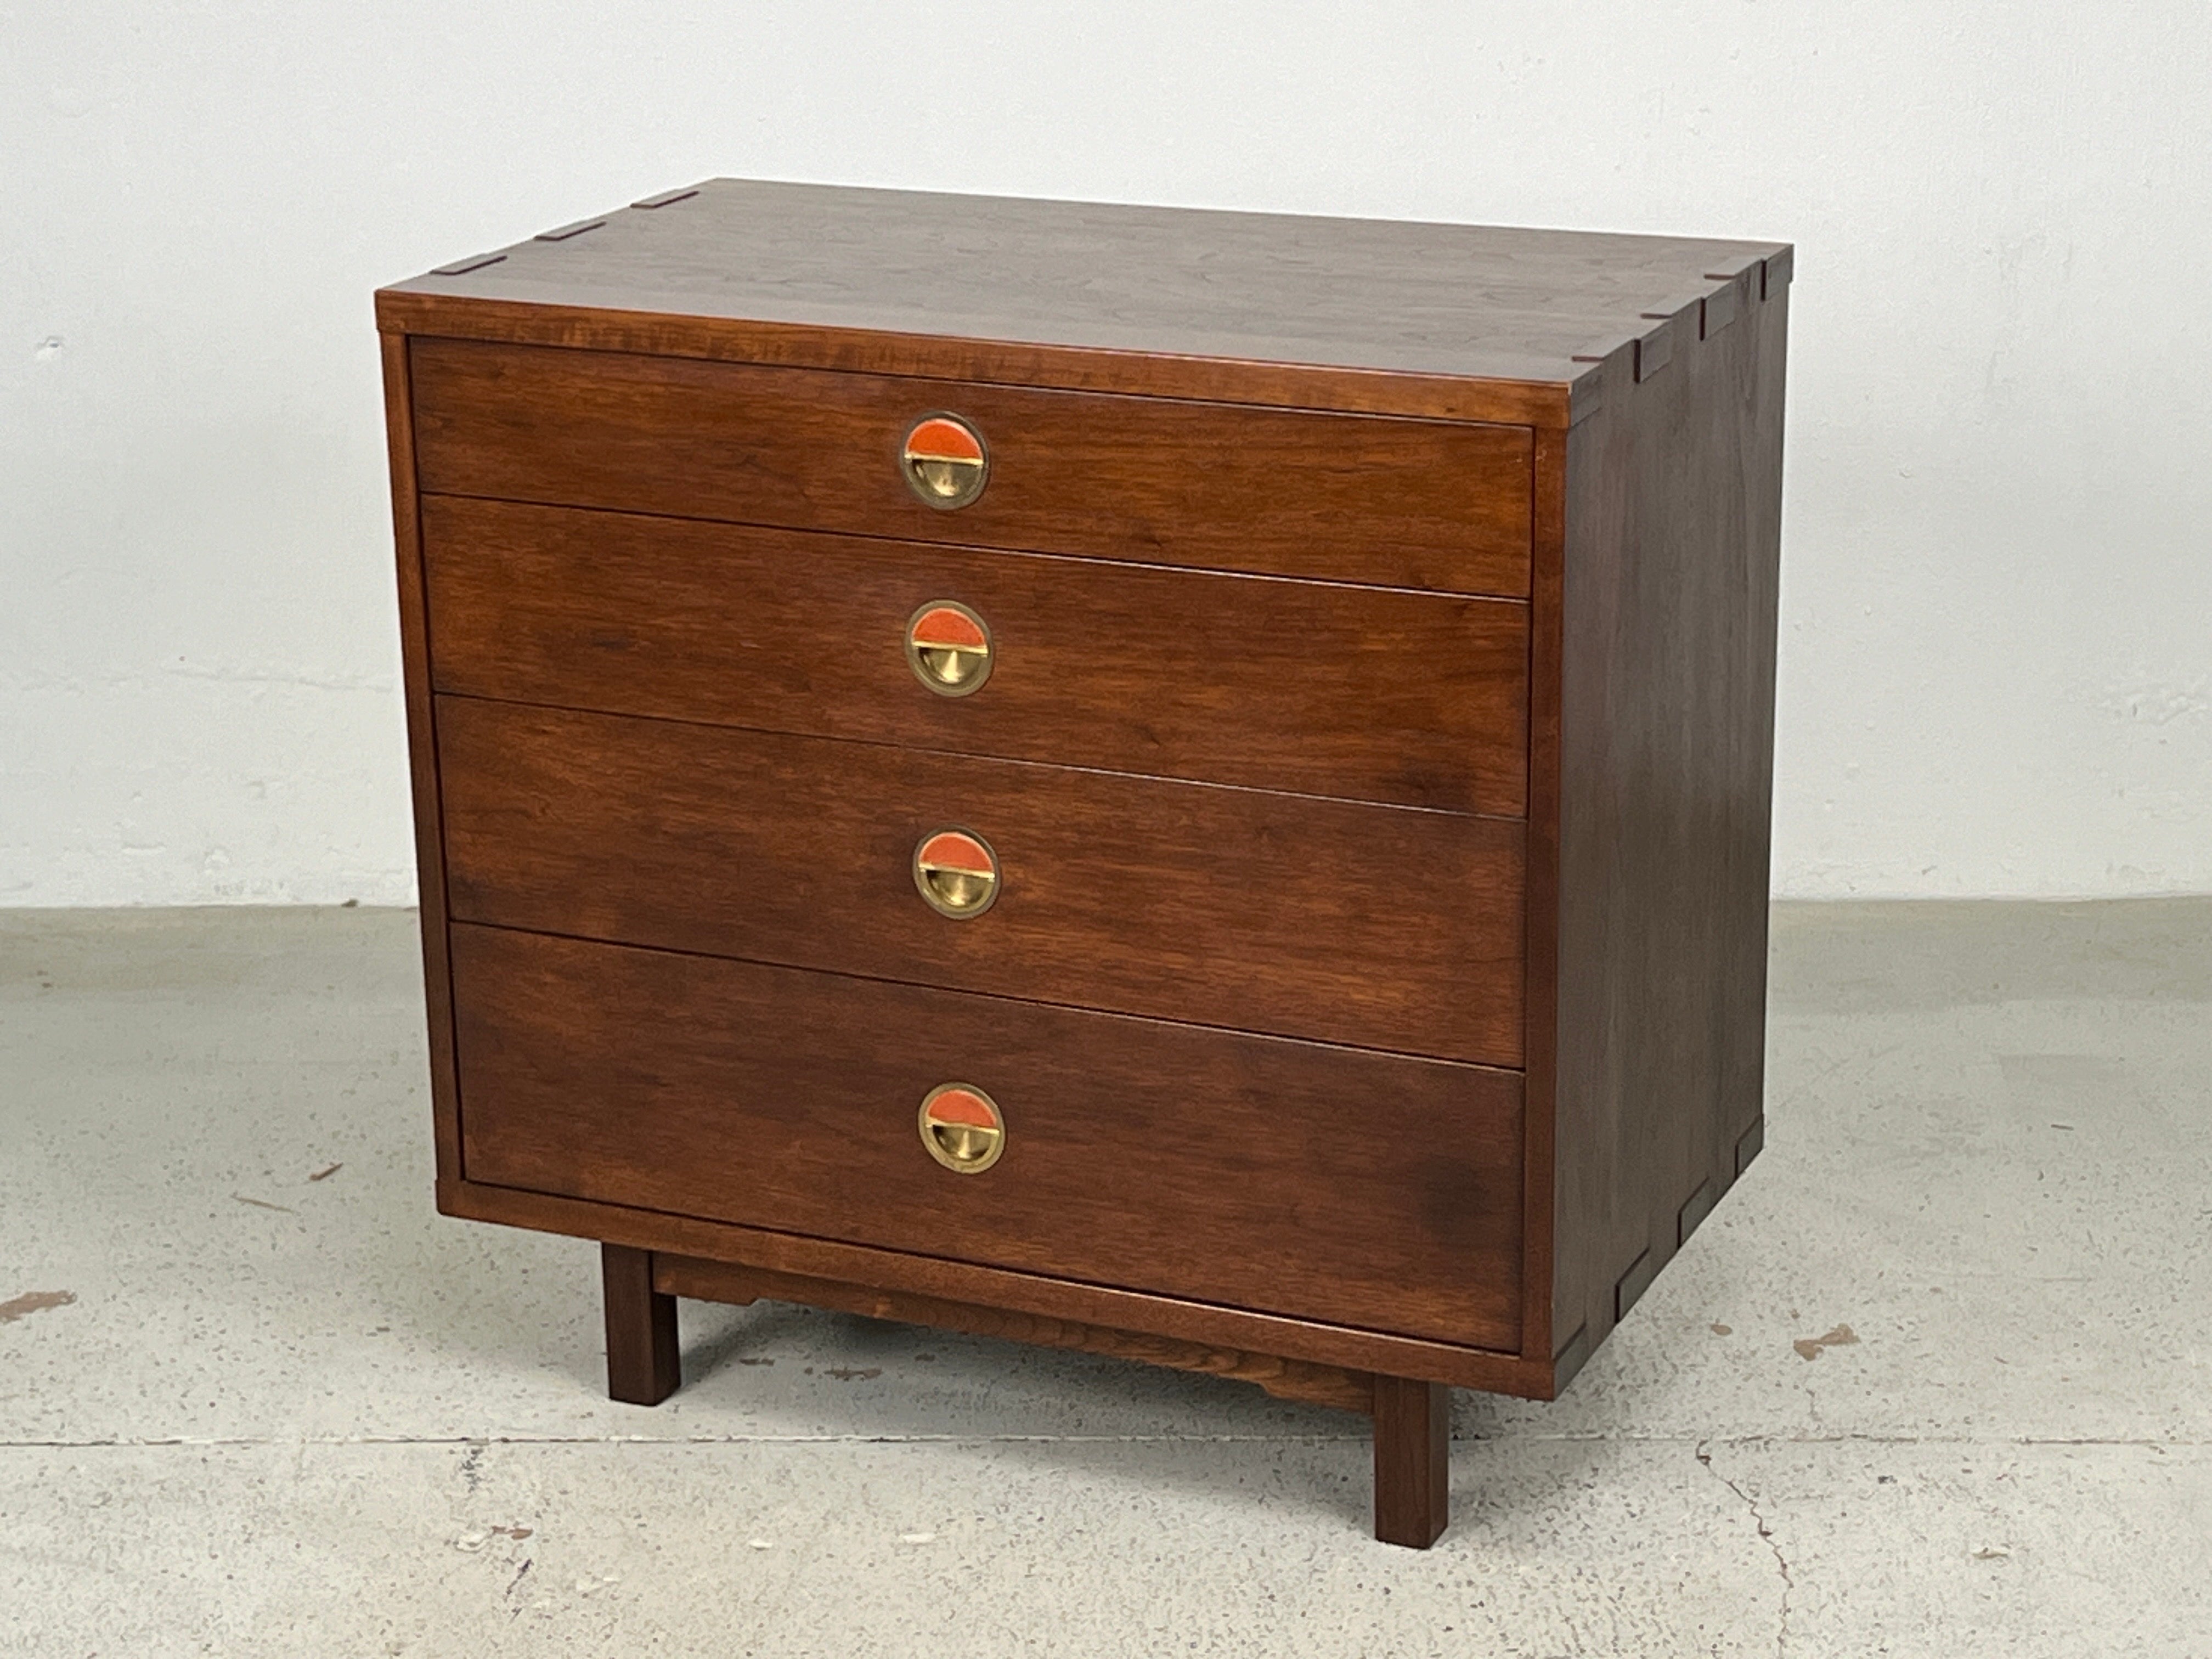 A rare chest designed by Edward Wormley for Dunbar. Solid walnut construction with exposed joinery and brass pulls with ceramic tiles by greta and Otto Natzler. 